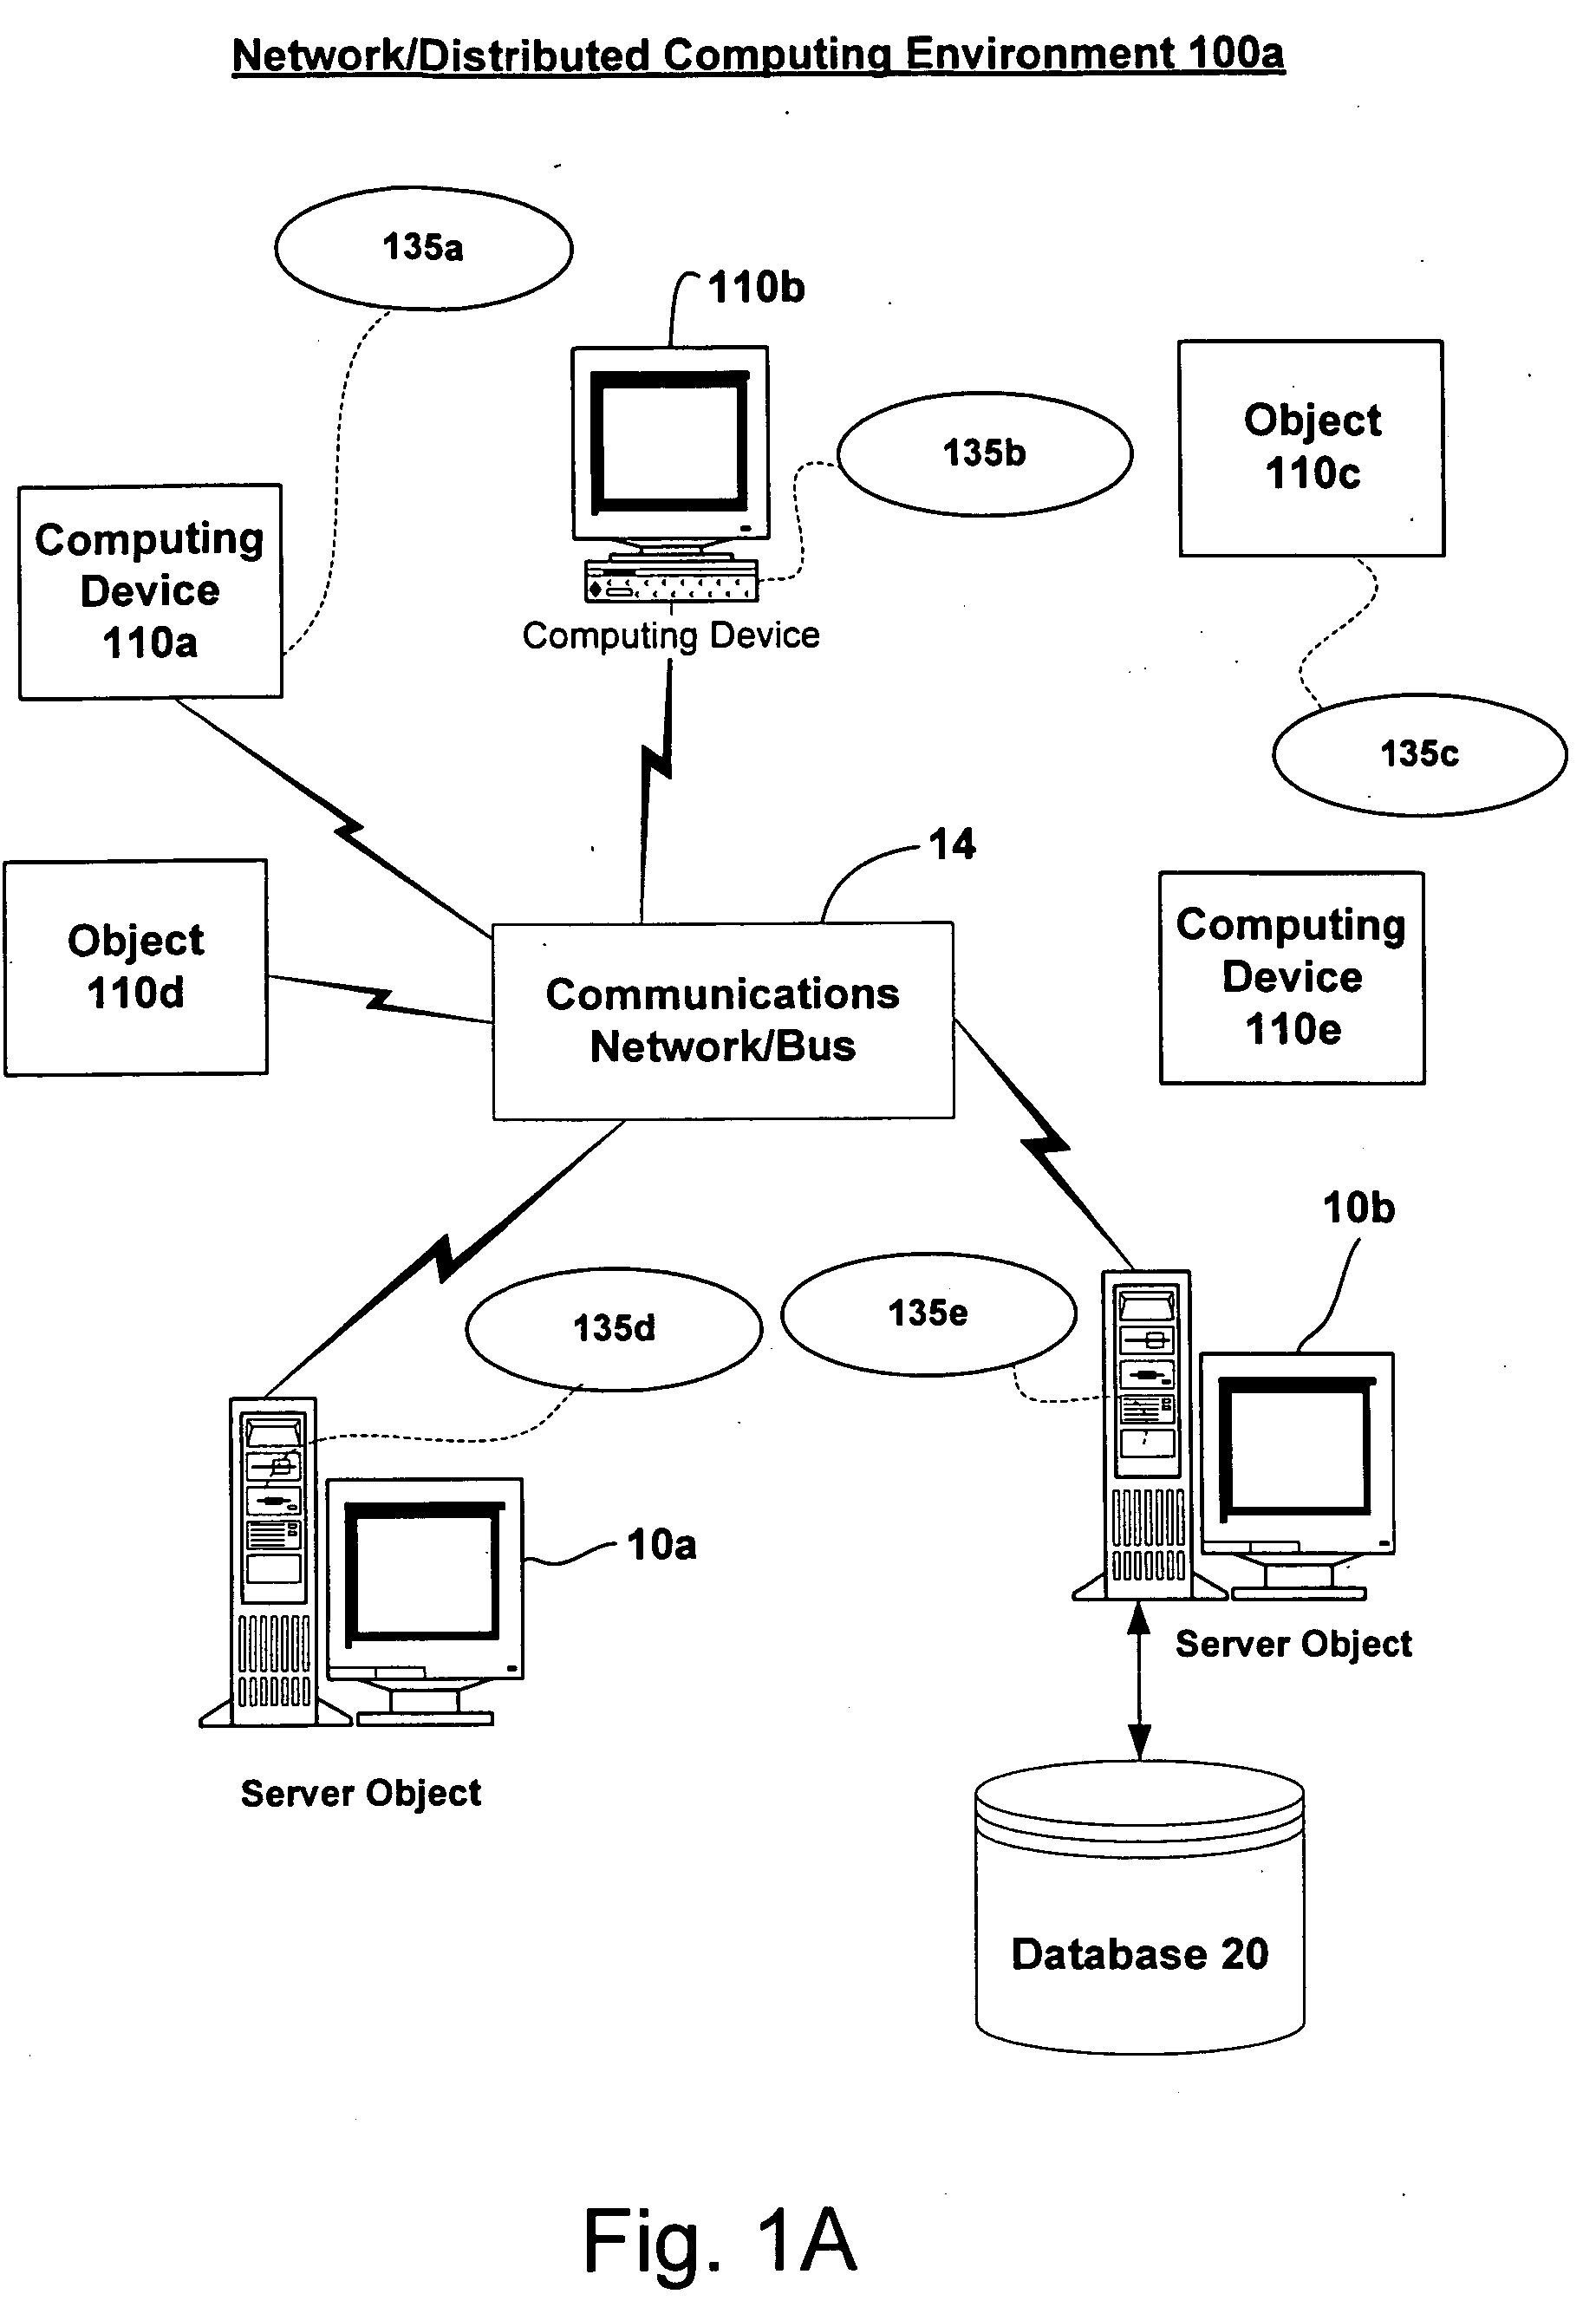 System and method for transferring data and metadata between relational databases